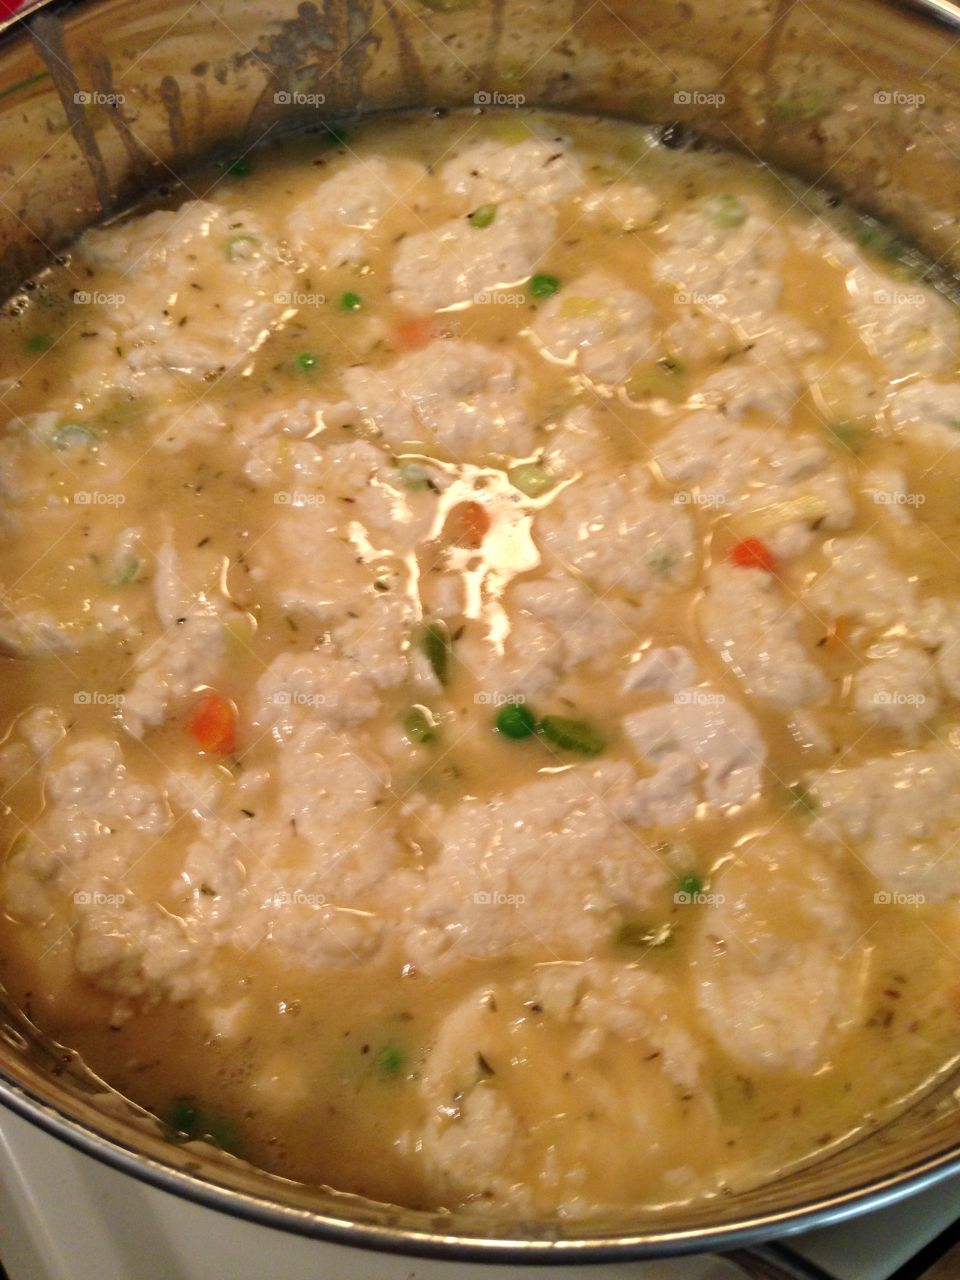 Vegan Chicken and Dumplings, made with vegetable stock, peas, carrots, homemade dumplings with flour, soy and several seasonings. 